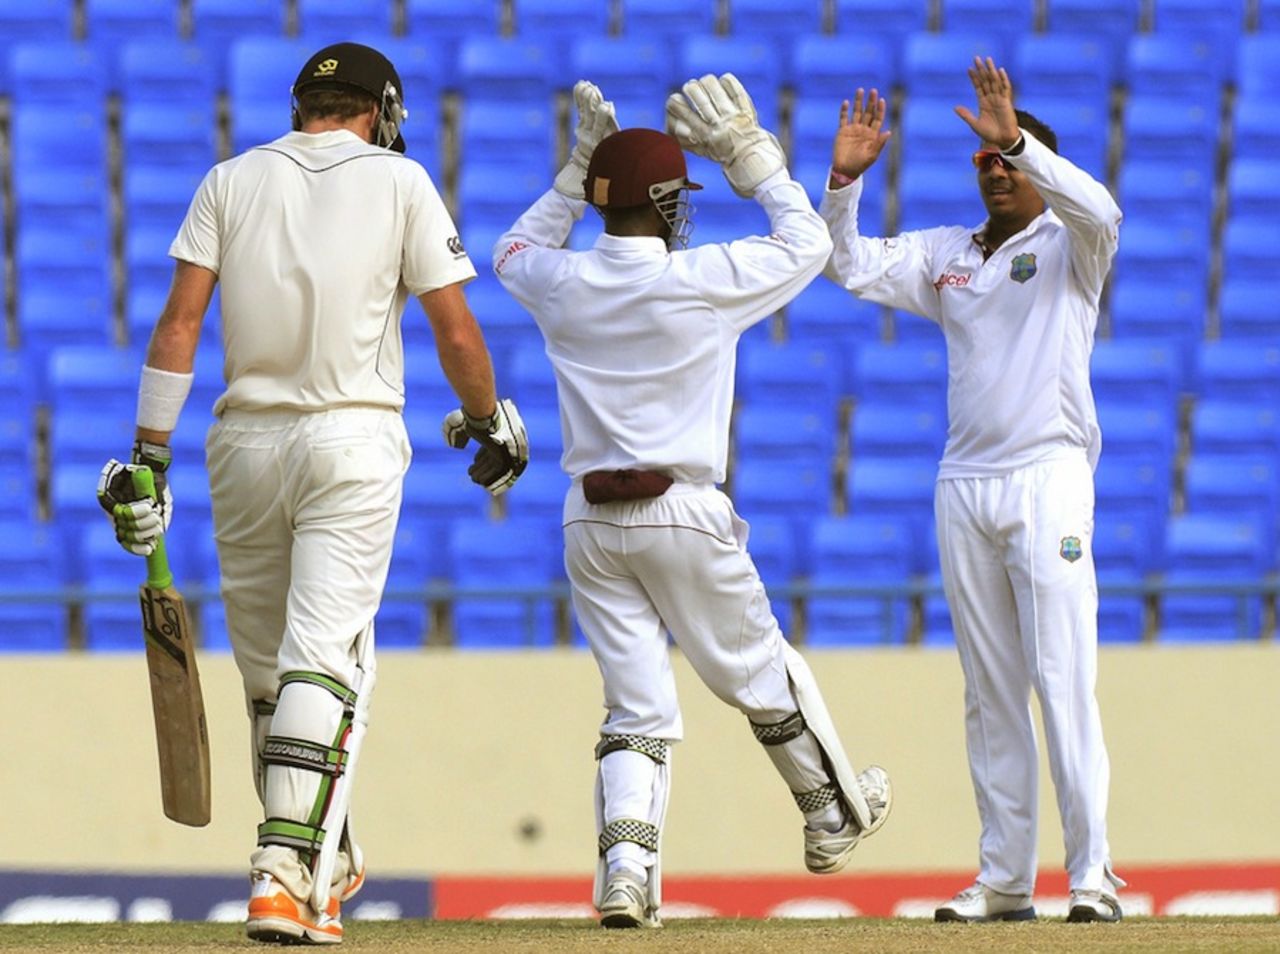 Sunil Narine dismissed Martin Guptill for 67, West Indies v New Zealand, 1st Test, Antigua, 4th day, July 28, 2012